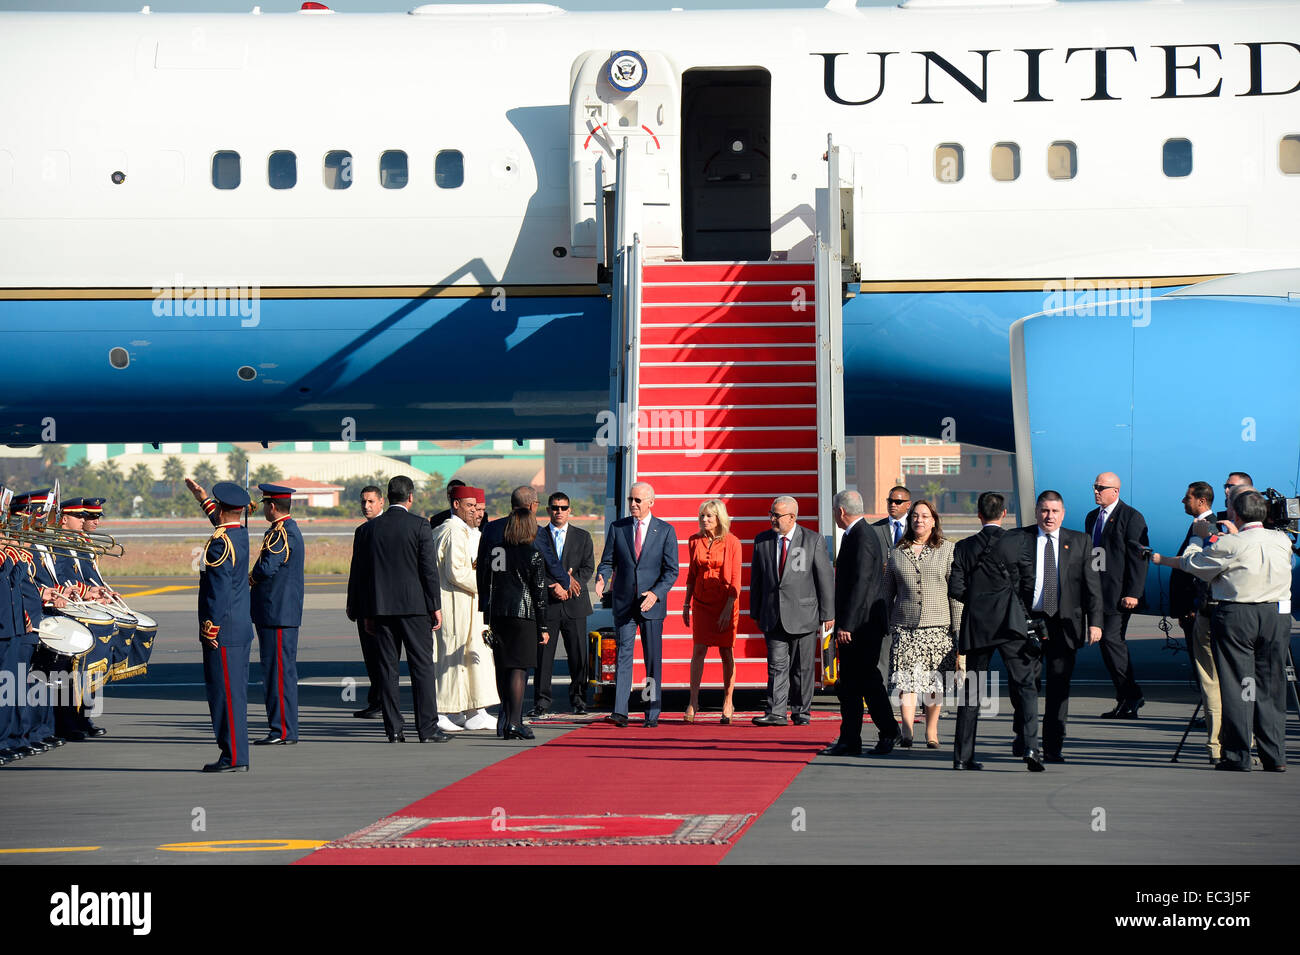 U.S. Vice President Joe Biden and Dr. Jill Biden are greeted by Moroccan officials upon their arrival to Marrakech, Morocco, to attend the fifth Global Entrepreneurship Summit on November 19, 2014. Stock Photo